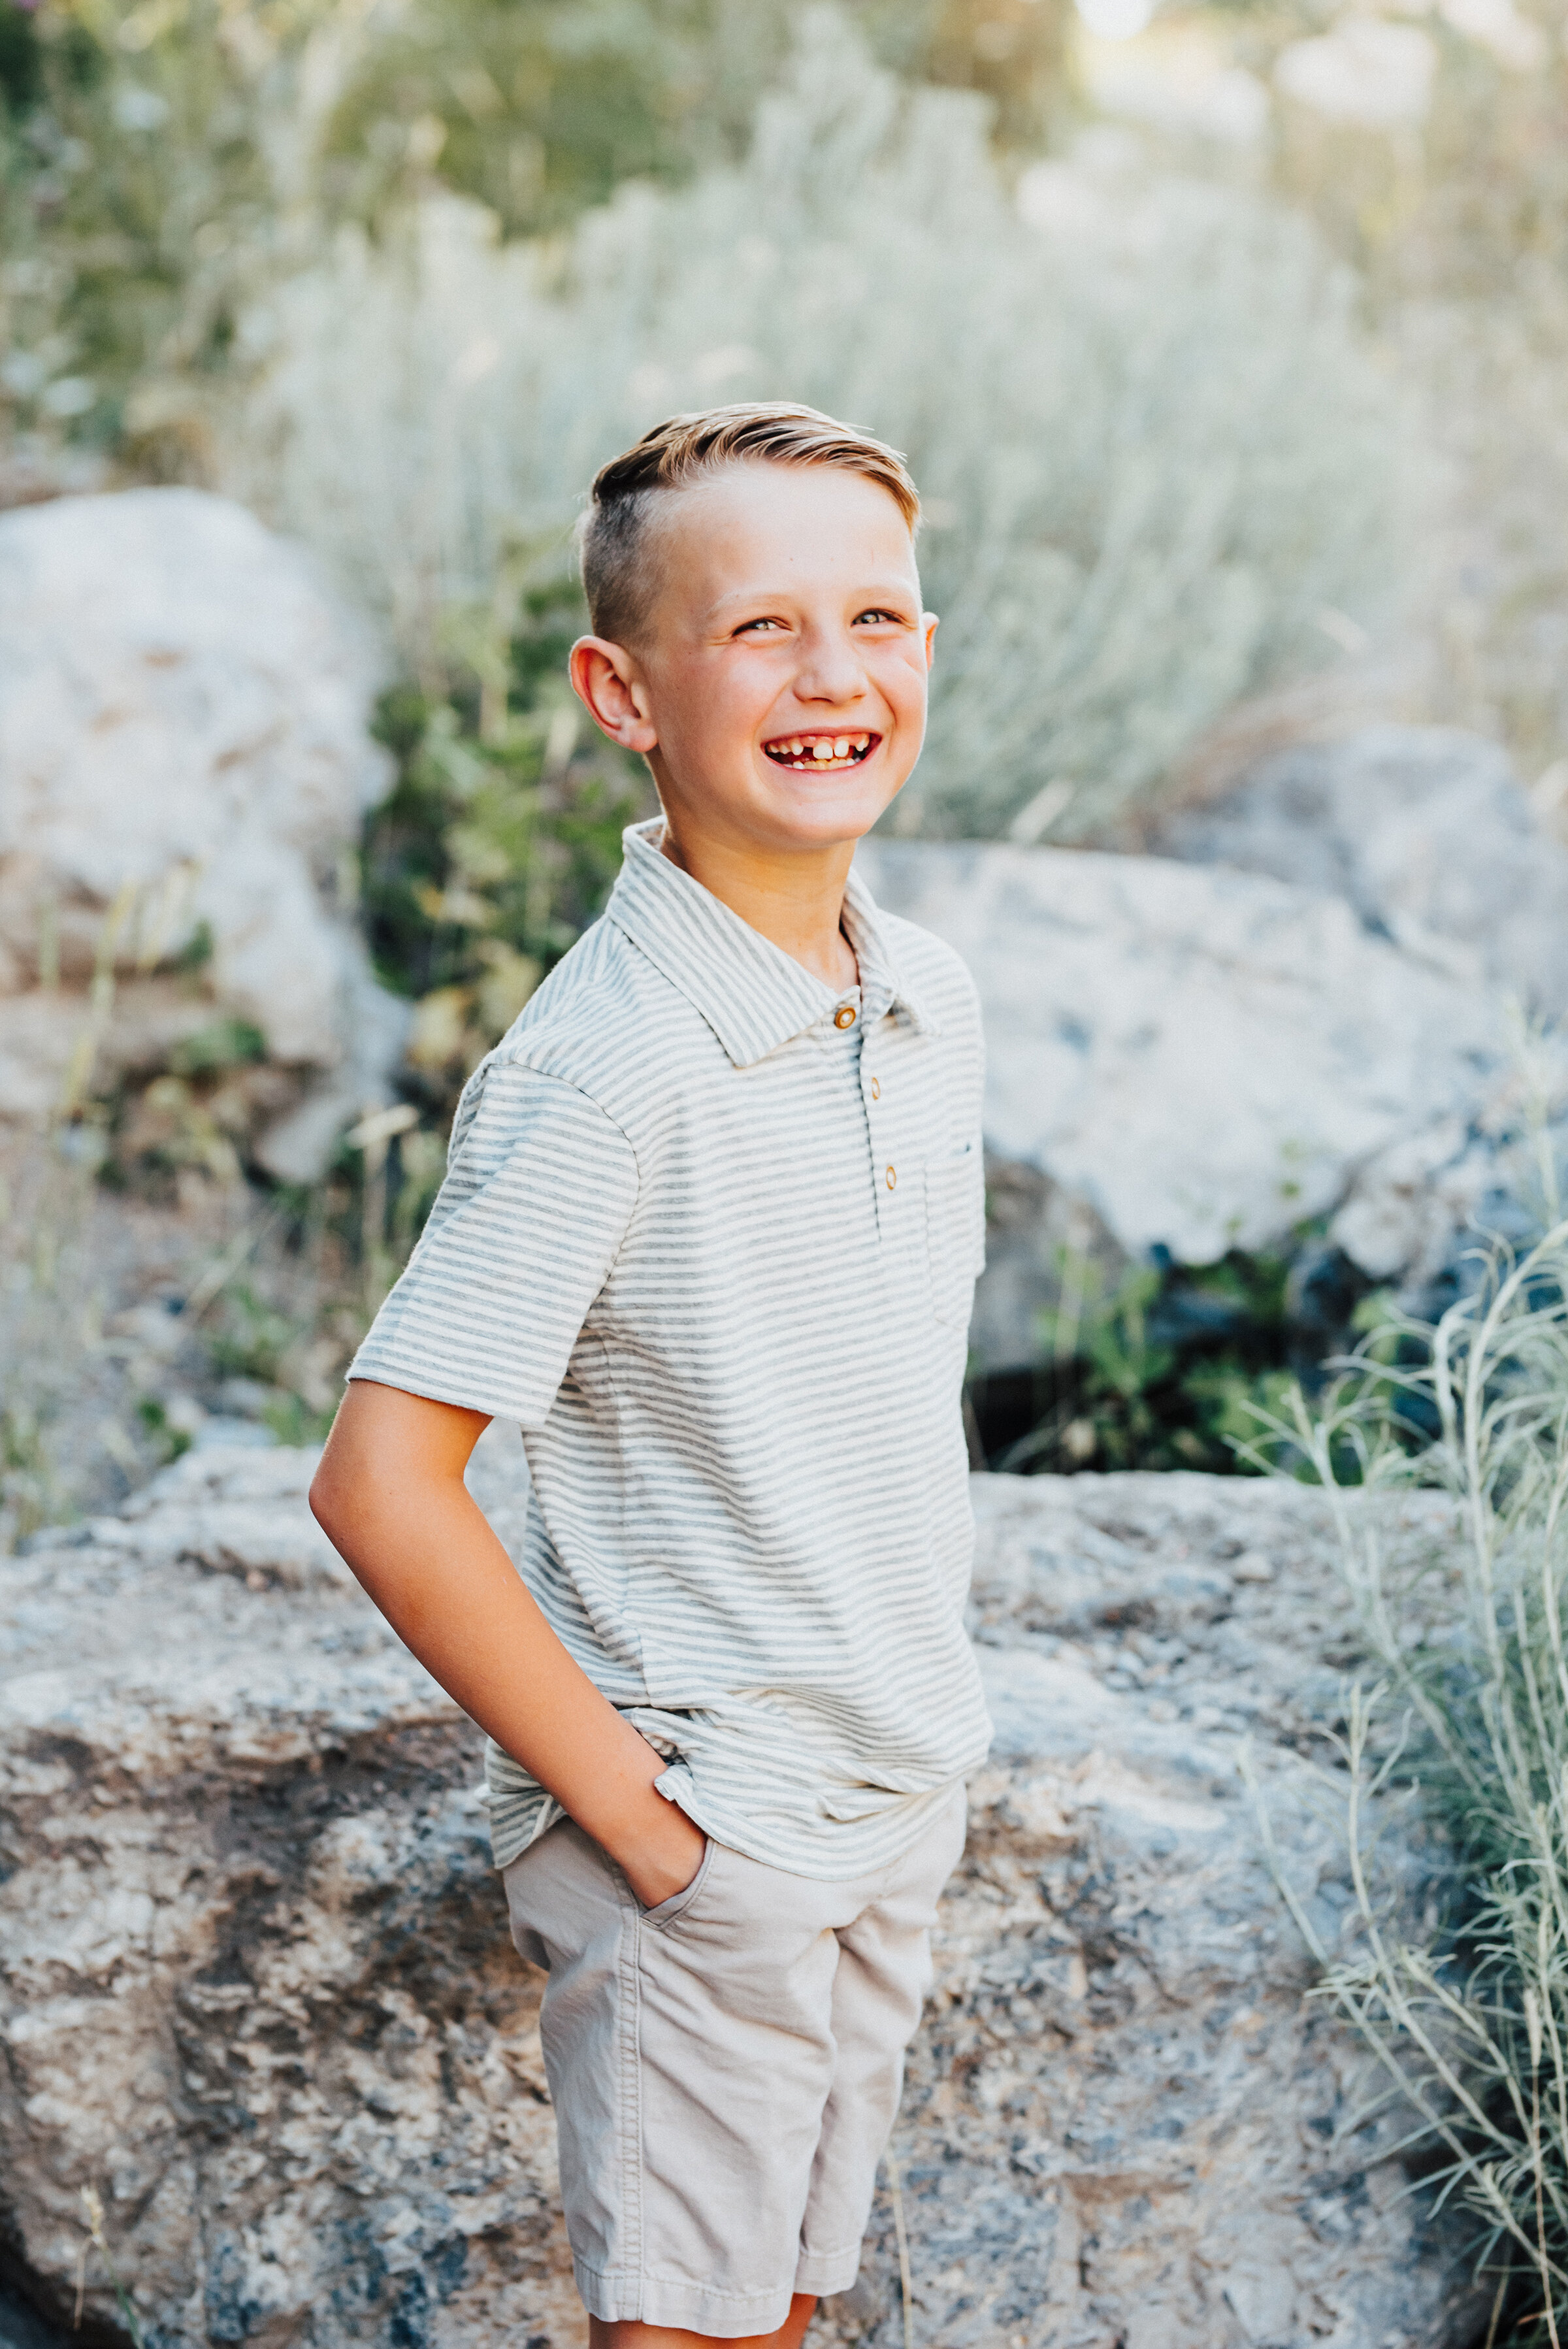  An adorable young boy cheesily grins into the camera with hands in his pockets while standing near a boulder in Providence Canyon, UT. light blue and khakis soft outdoor setting casual standing cheesy toothy grin #providencecanyon #utahphotography #utah #familyphoto #family #familyphotography #familyphotographer #photography #familylife #outdoorphotoshoot #son #individualphoto 